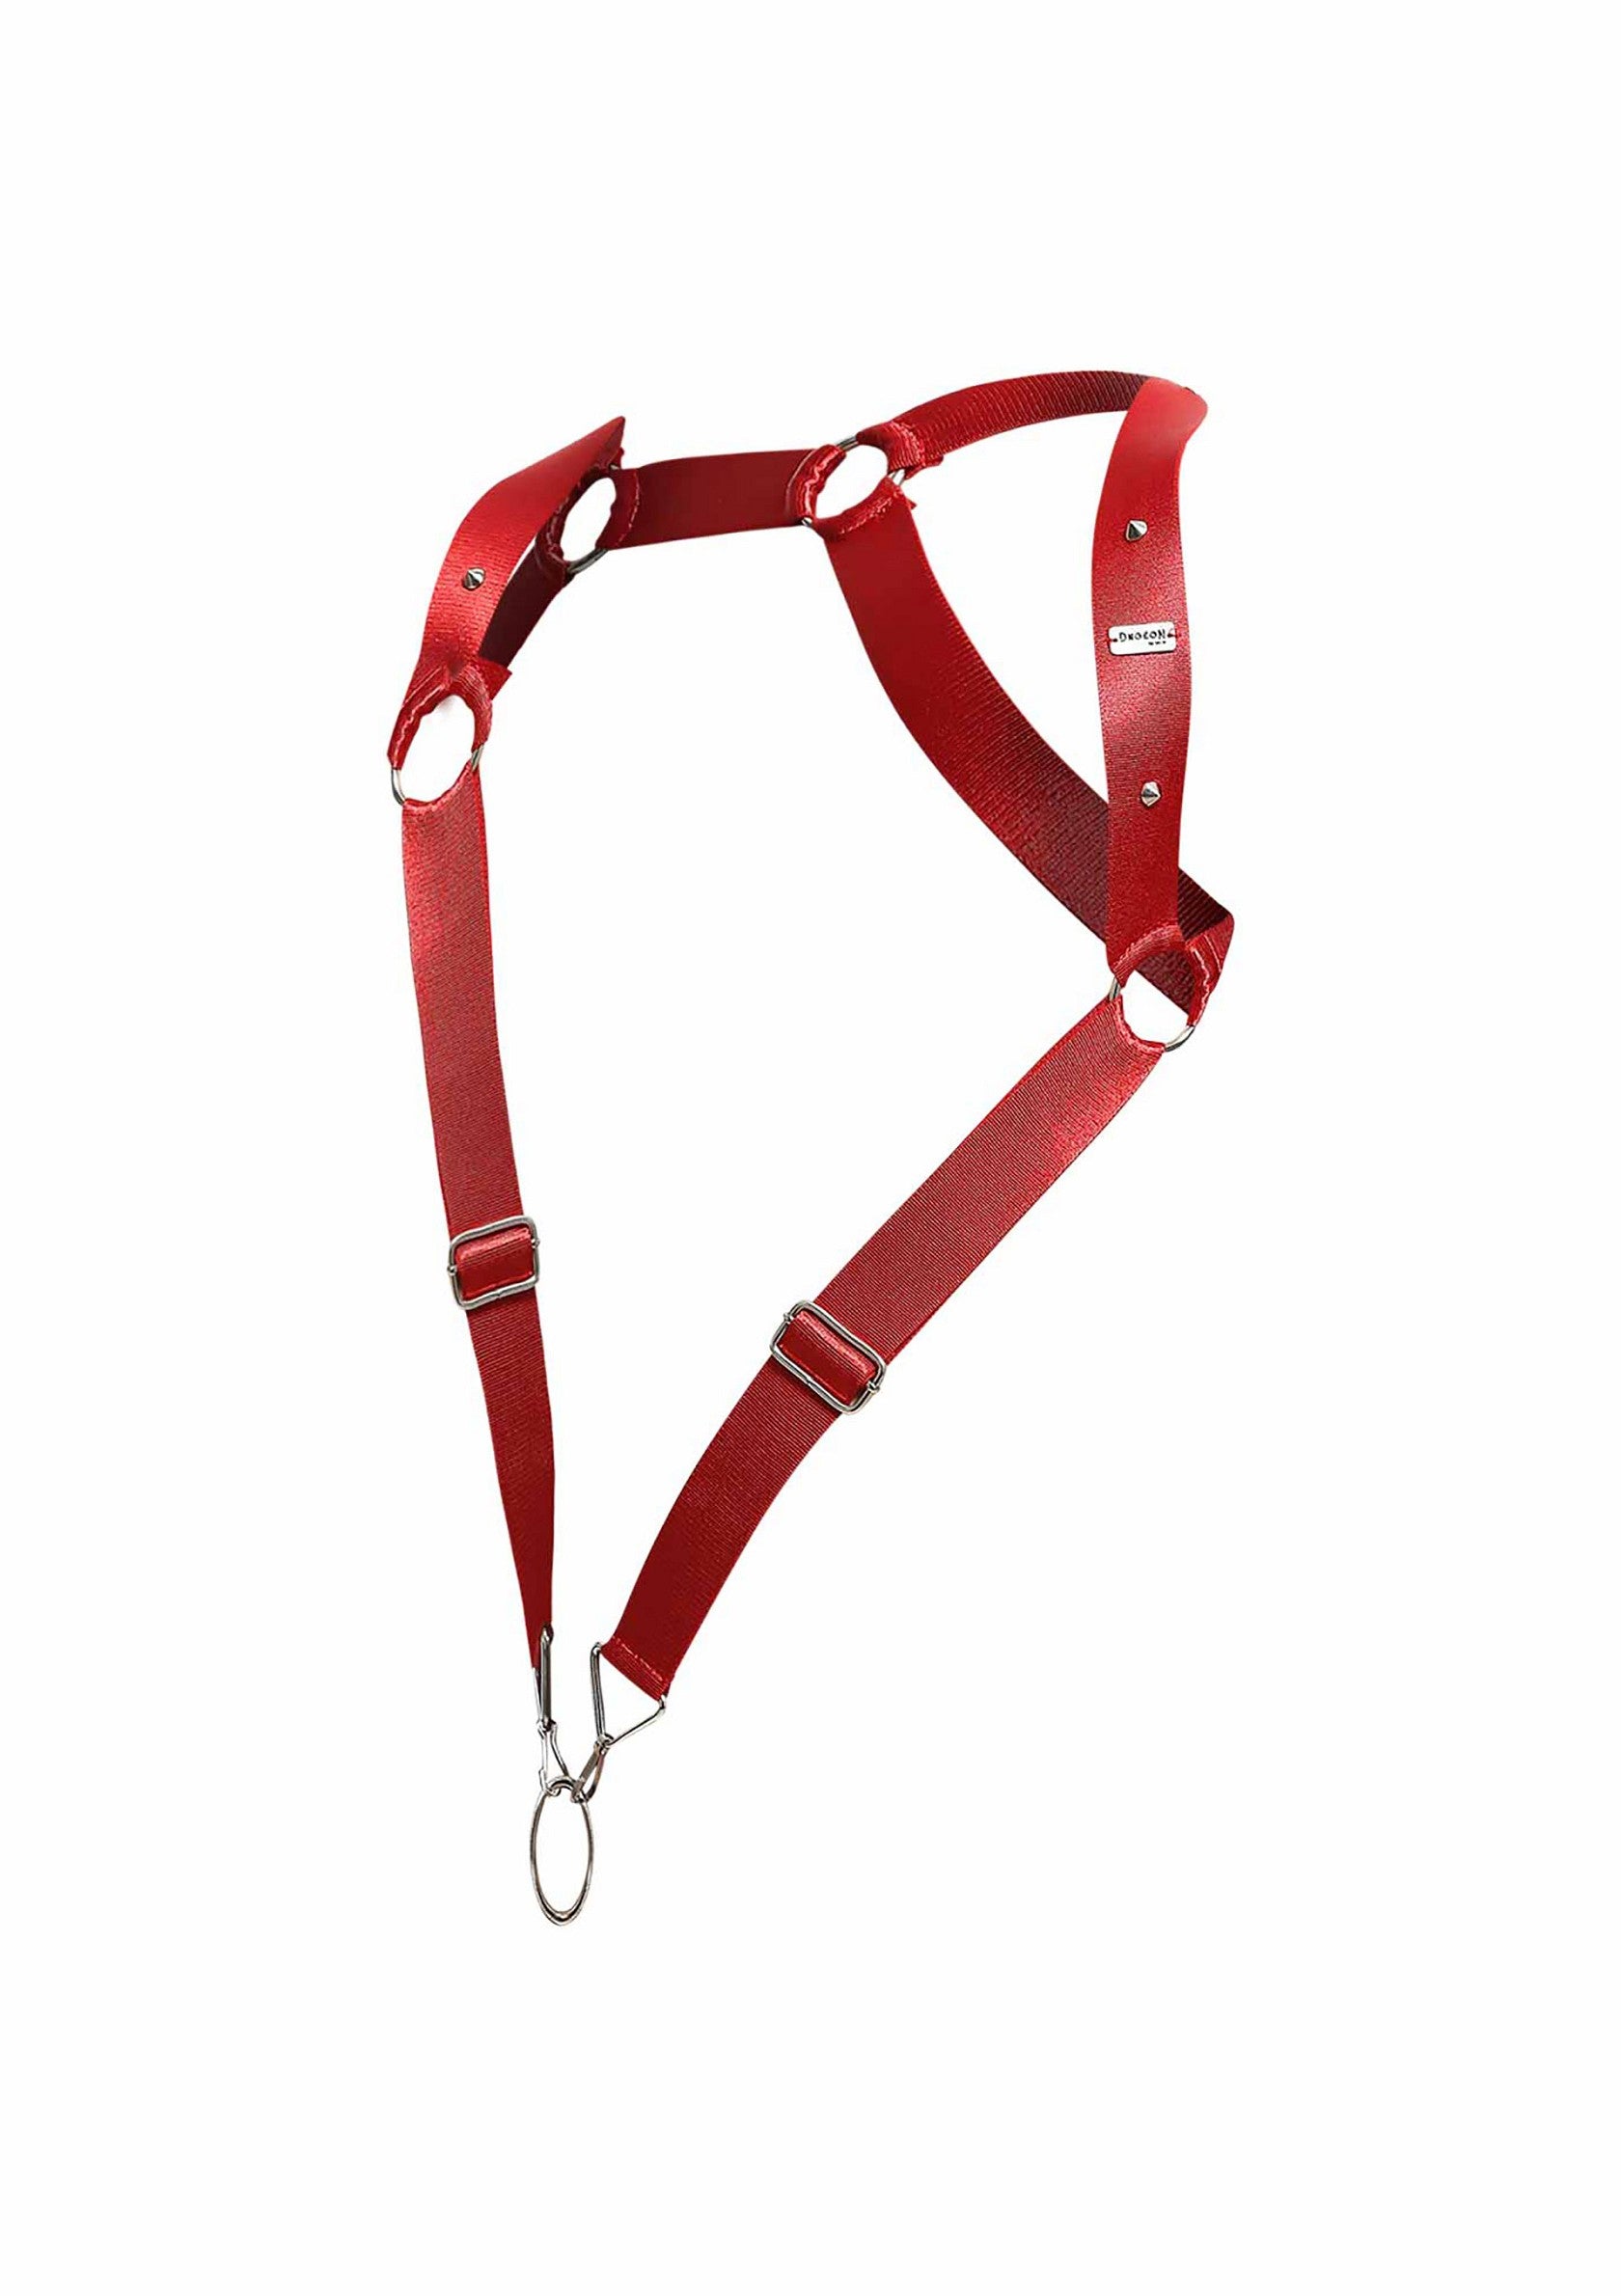 MOB Eroticwear Dngeon Straigh Back Harness RED O/S - 6